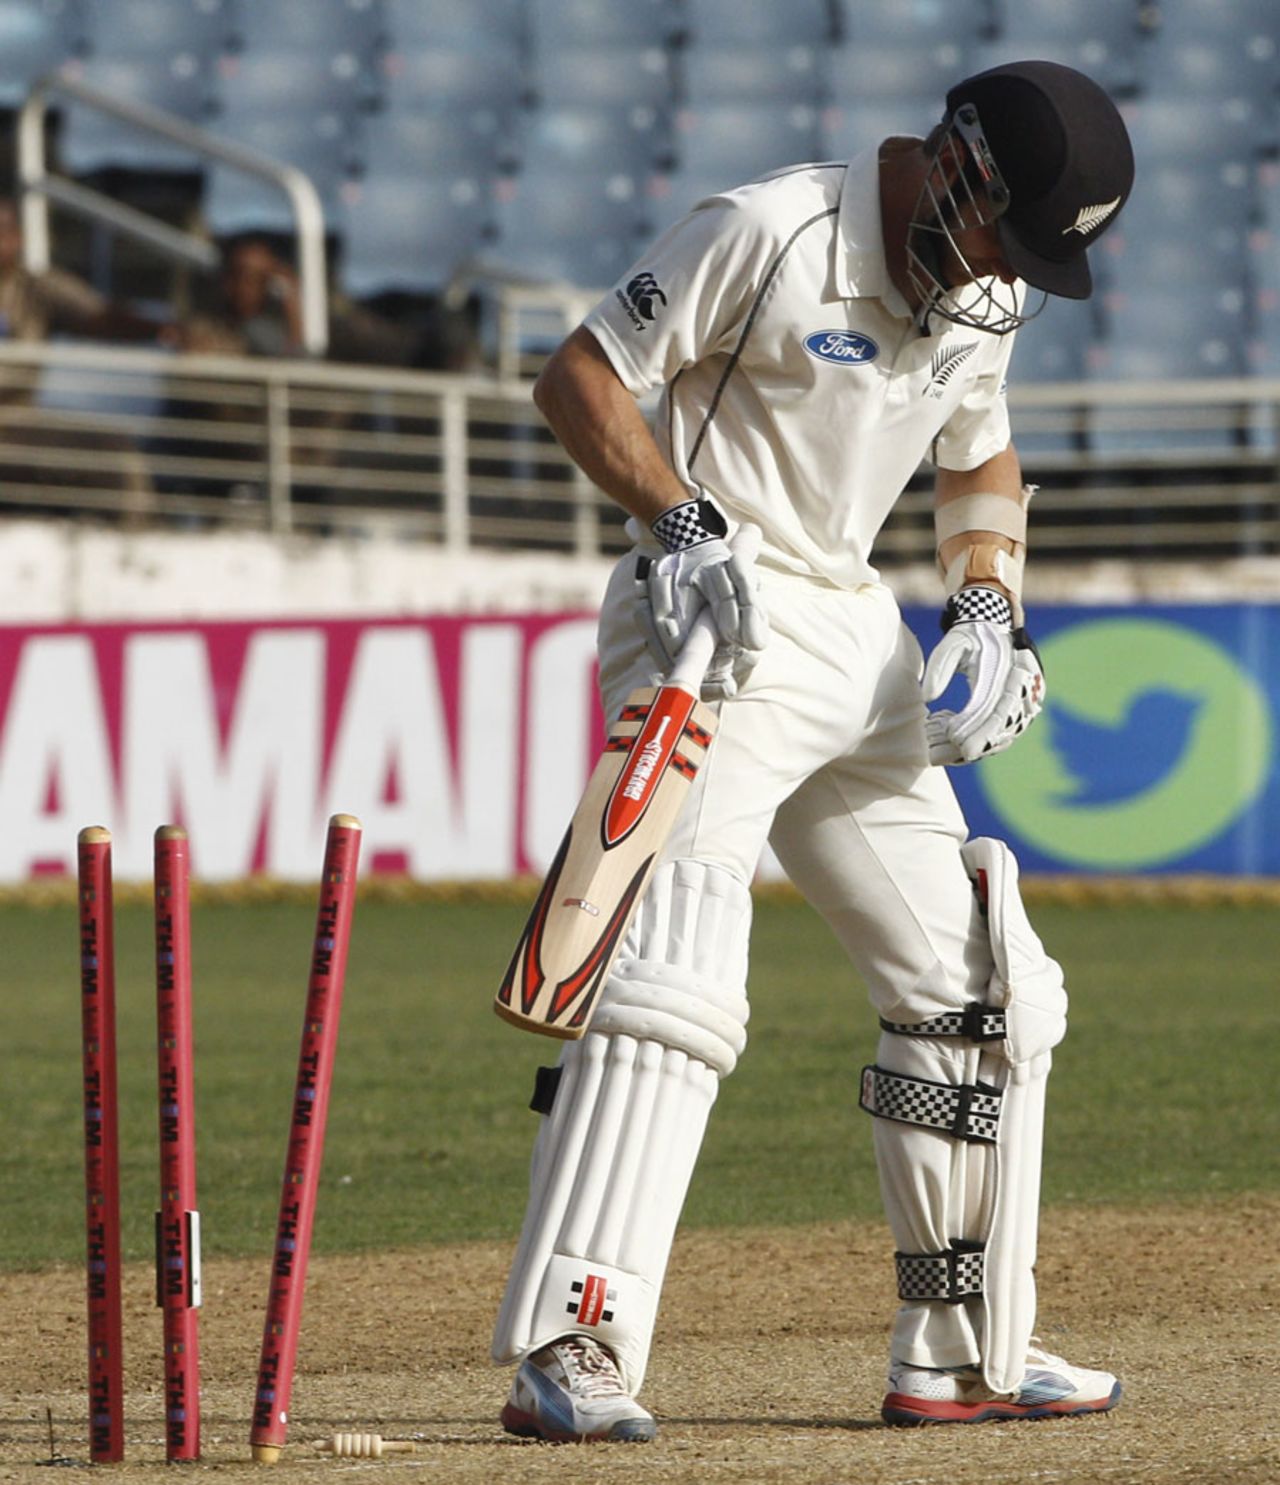 Kane Williamson was bowled for the second time in the match, West Indies v New Zealand, 1st Test, Kingston, 3rd day, June 10, 2014